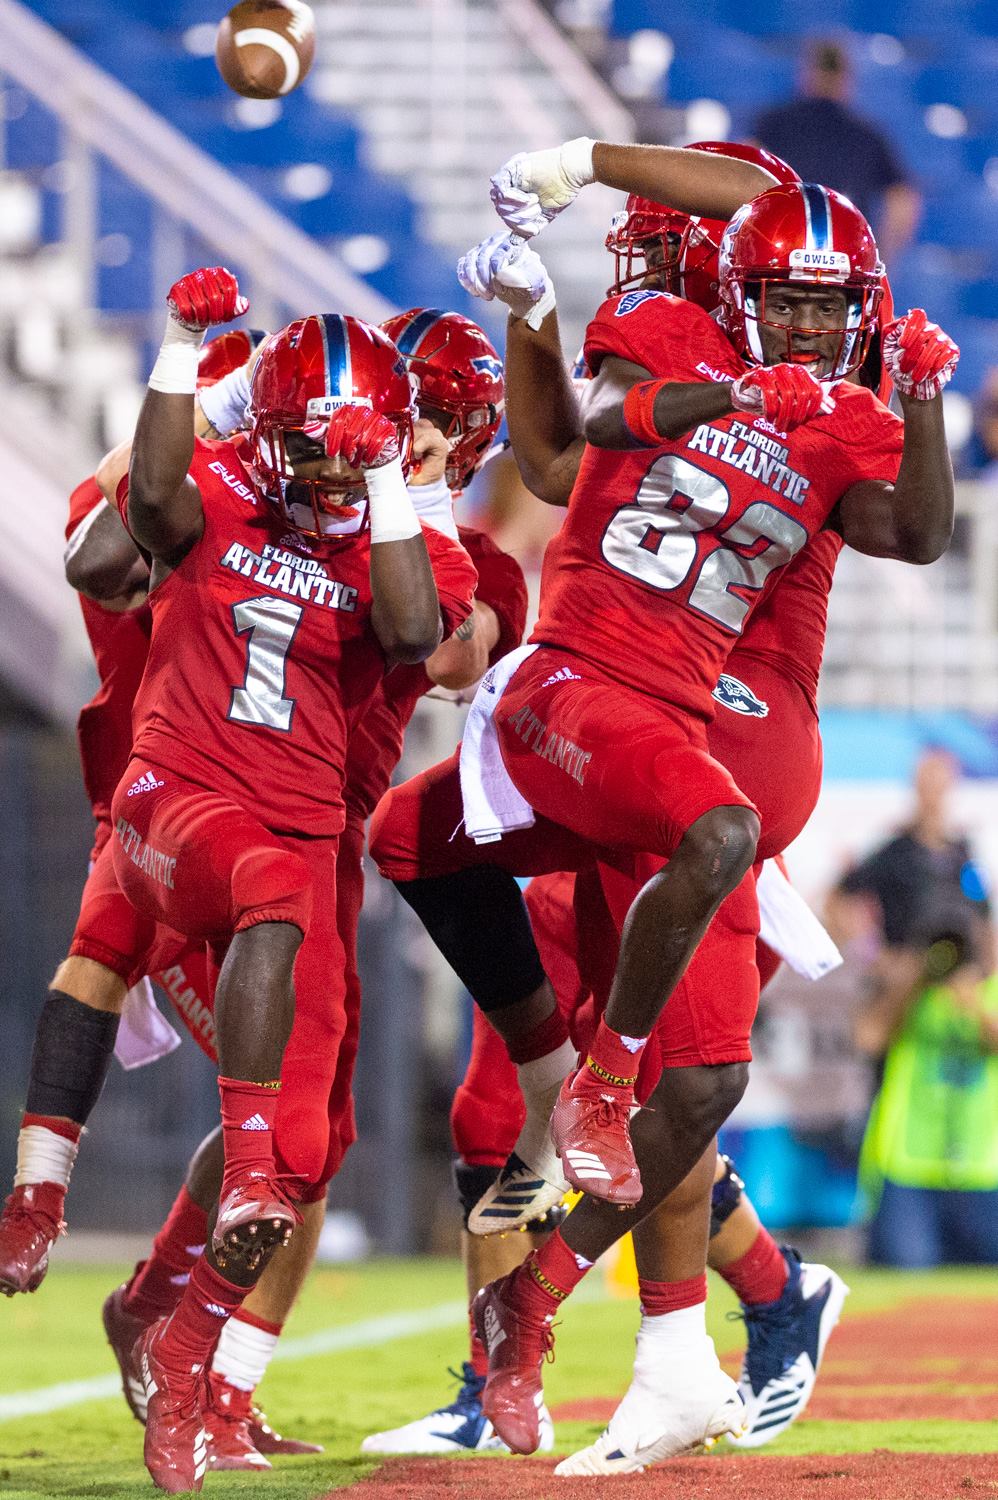 Four Down Territory:<br> FAU 52, ODU 33 <div class='secondary-title'><span style='color:#818181;font-size:14px;'>Harrison Bryant is weaponized, FAU's DBs make gains and Azeez Al-Shaair gets ejected - all part of our Four Down Territory FAU vs ODU game analysis.</div>